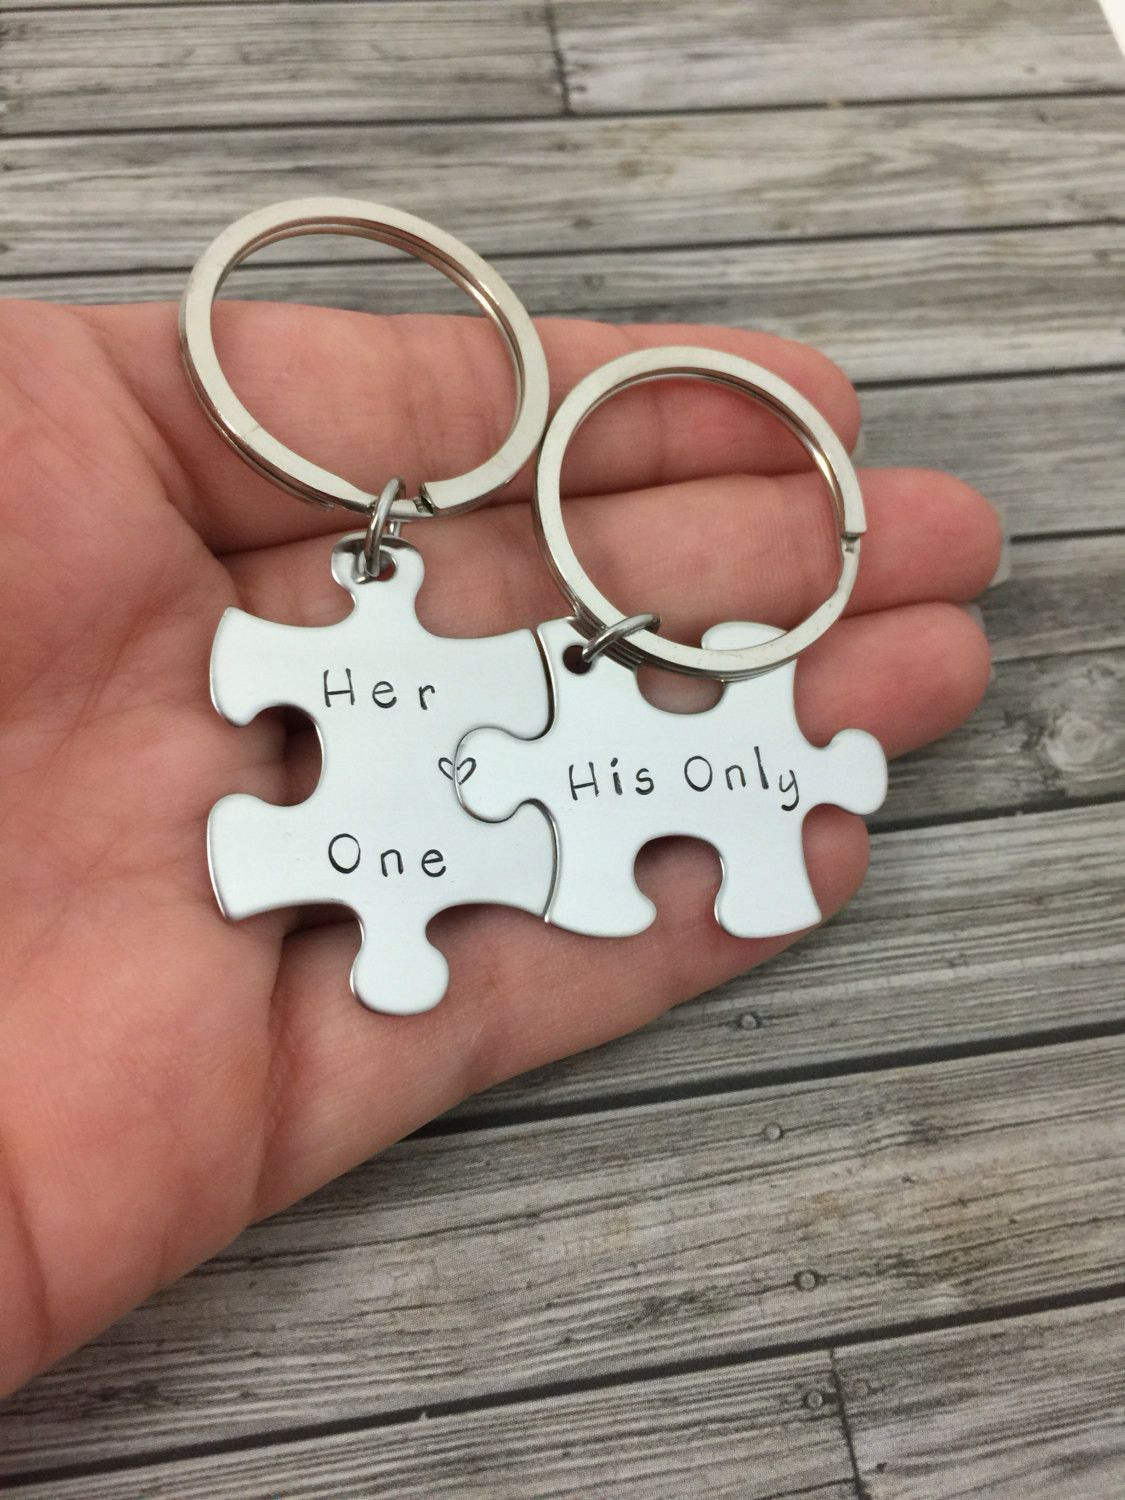 Cute Couple Gift Ideas
 Boyfriend Gift Couples Keychains Her e His ly Puzzle